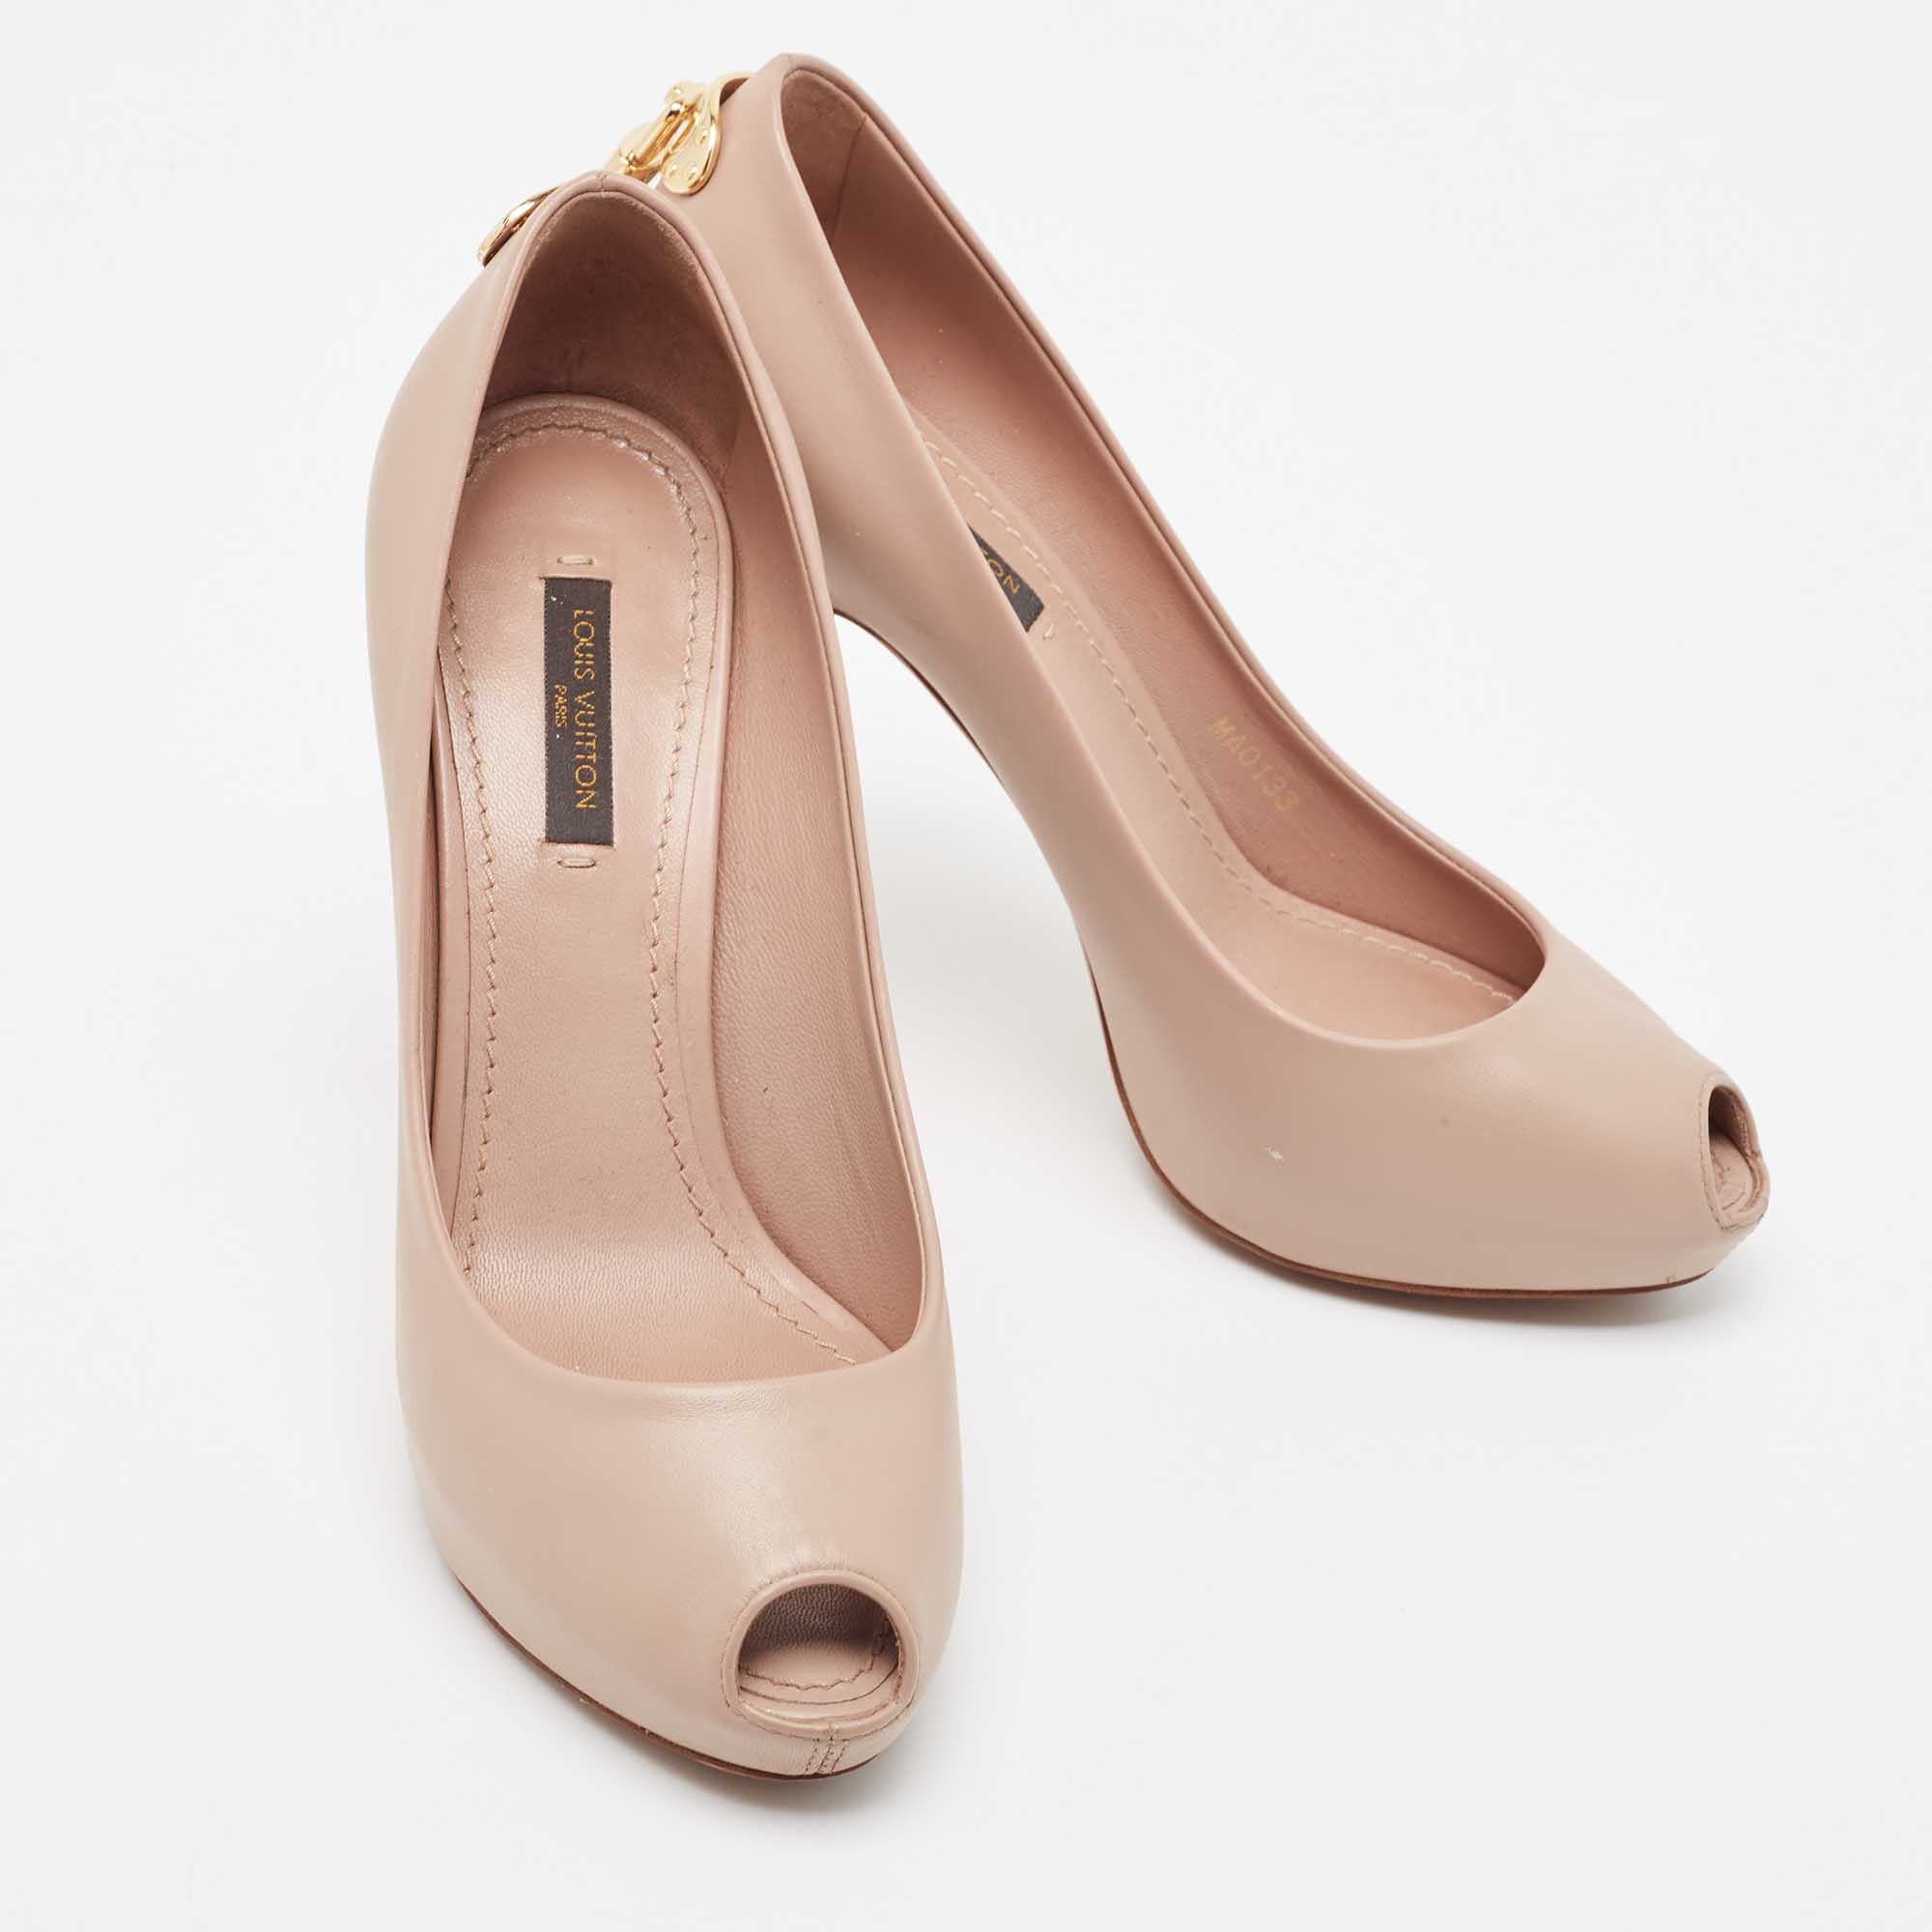 Louis Vuitton Beige Leather Oh Really! Pumps Size 36